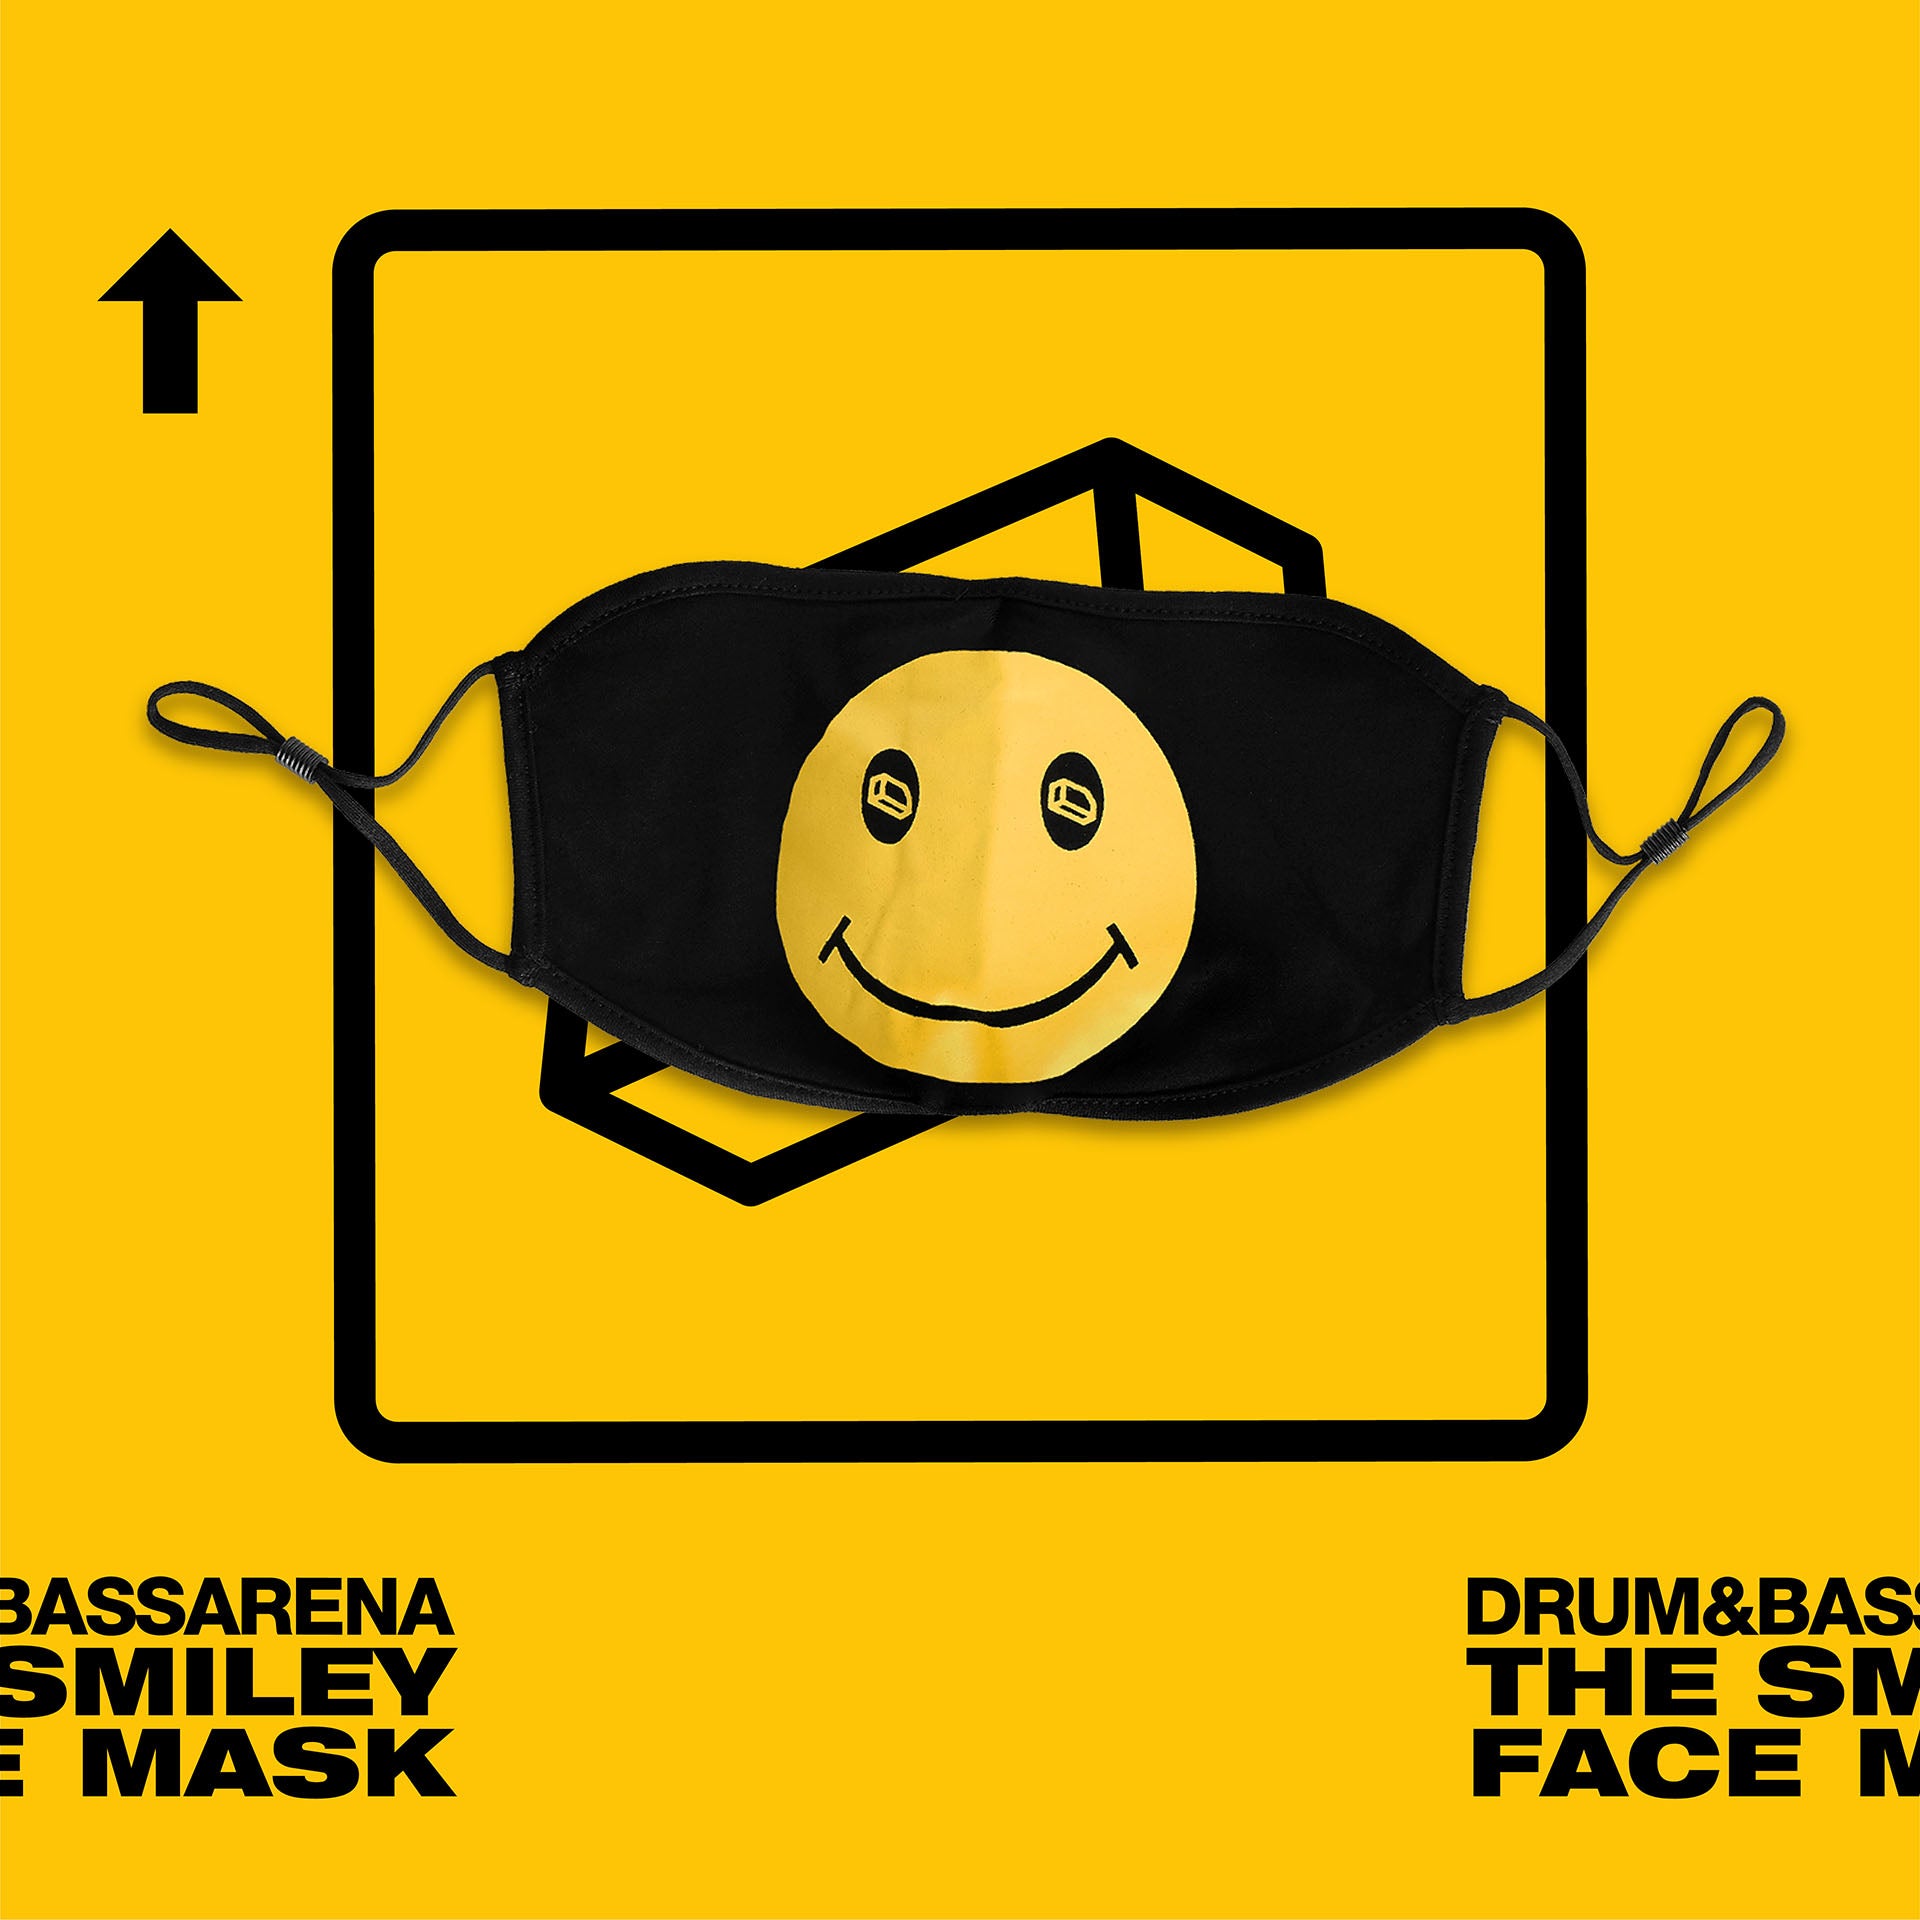 The Smiley Face Mask